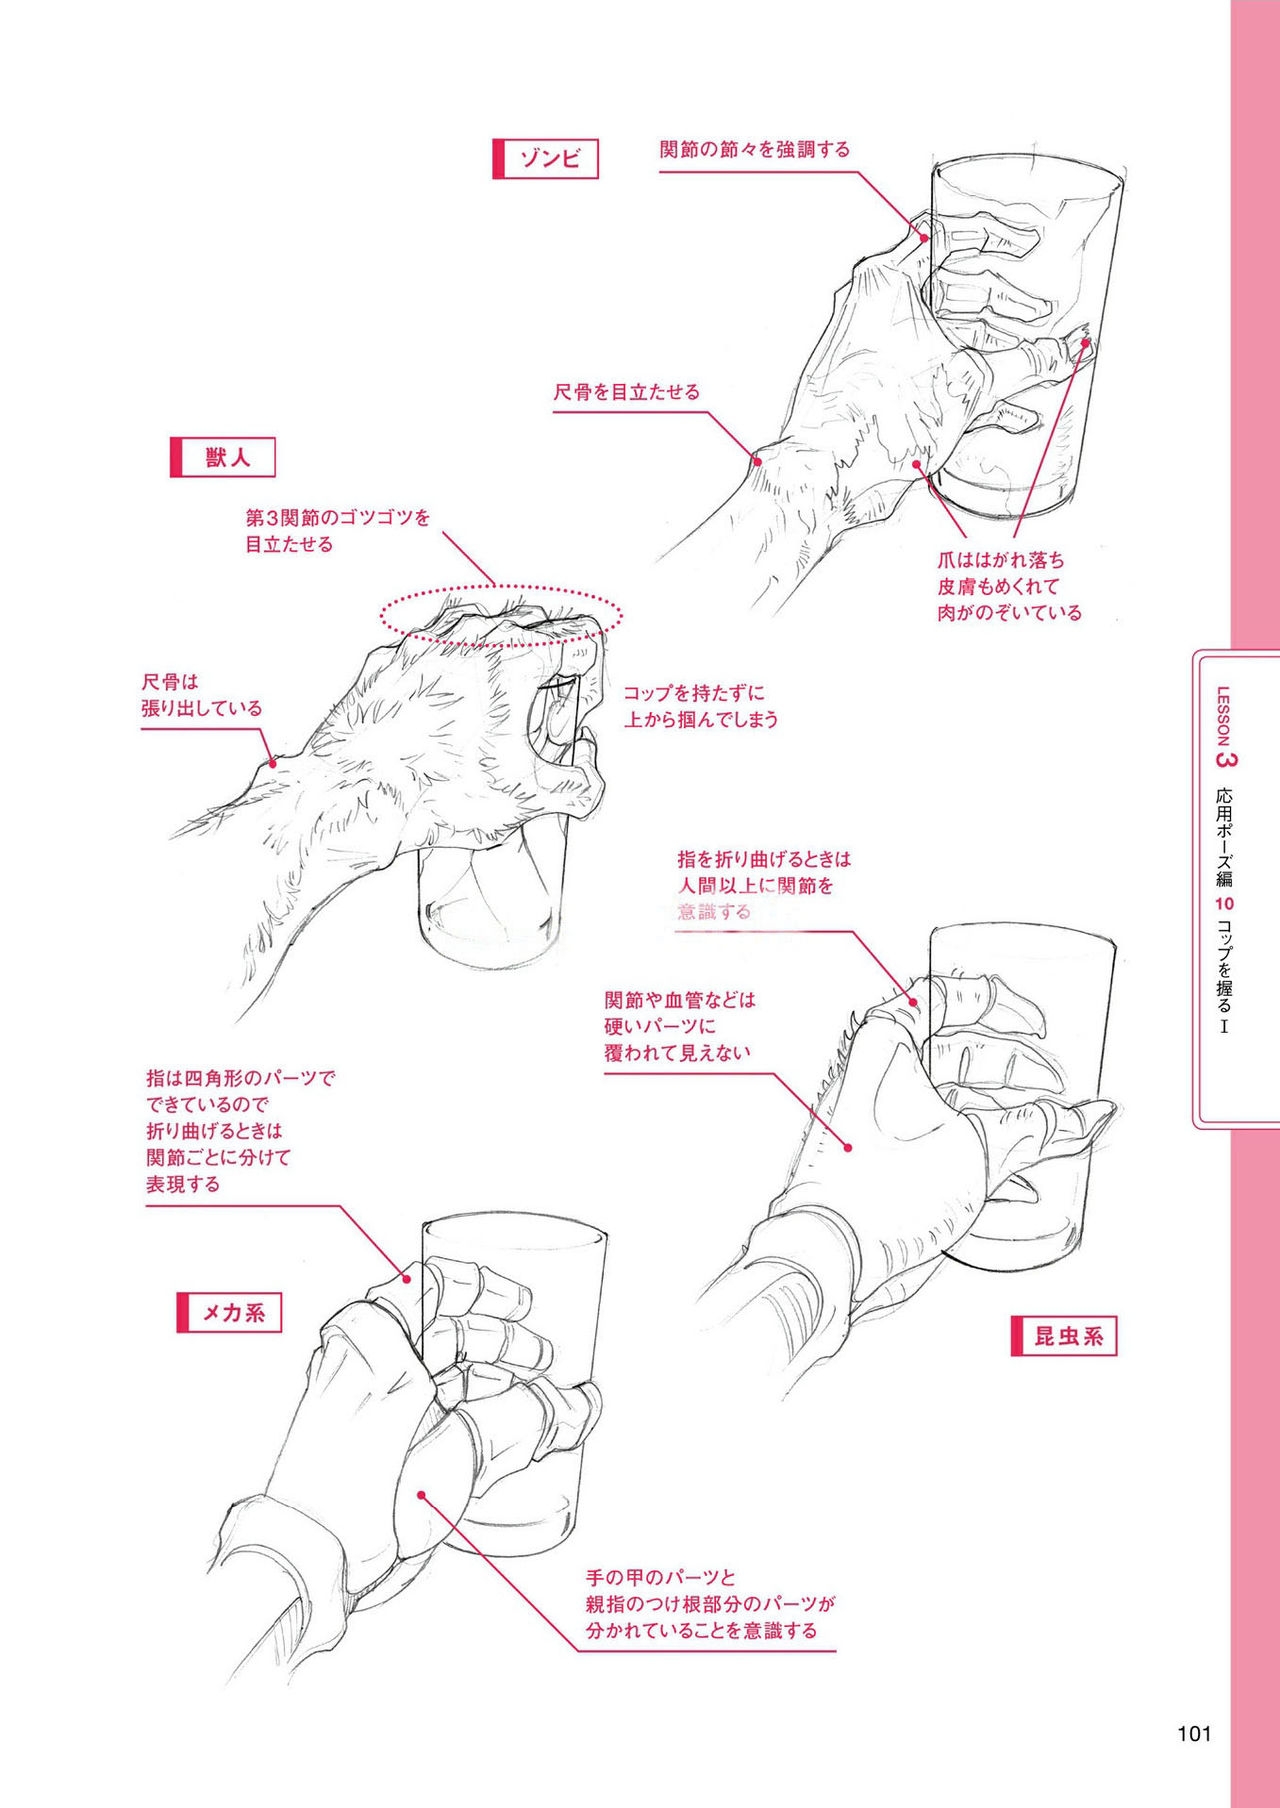 How to draw hands 101